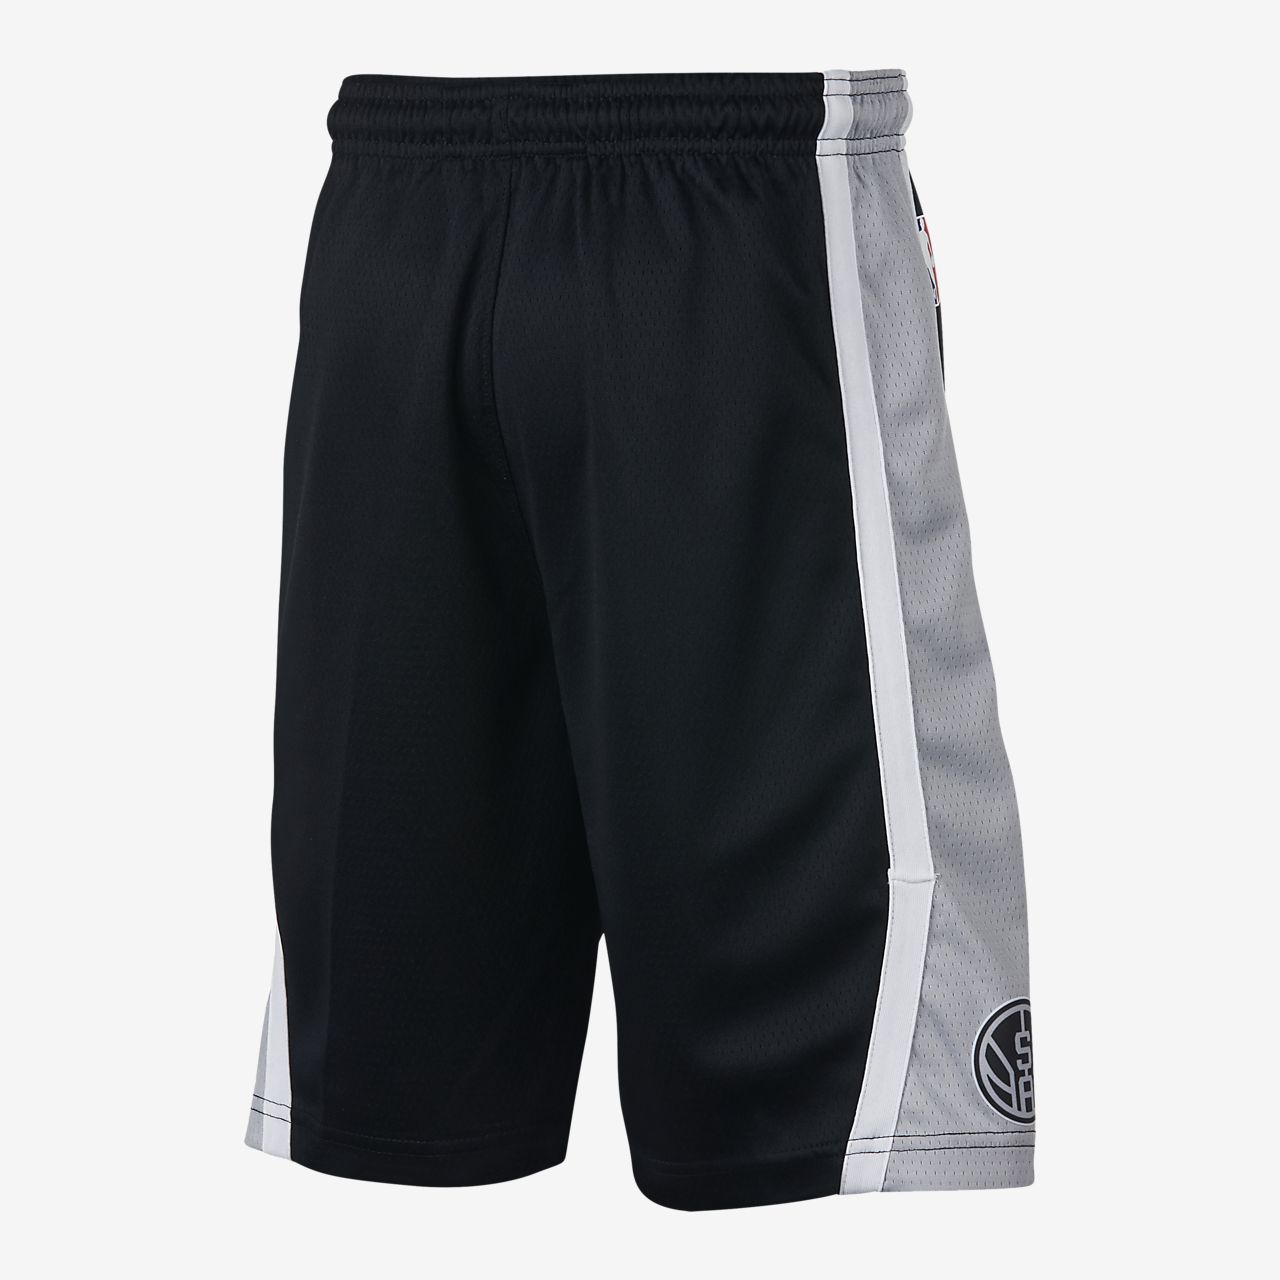 lakers shorts for kids